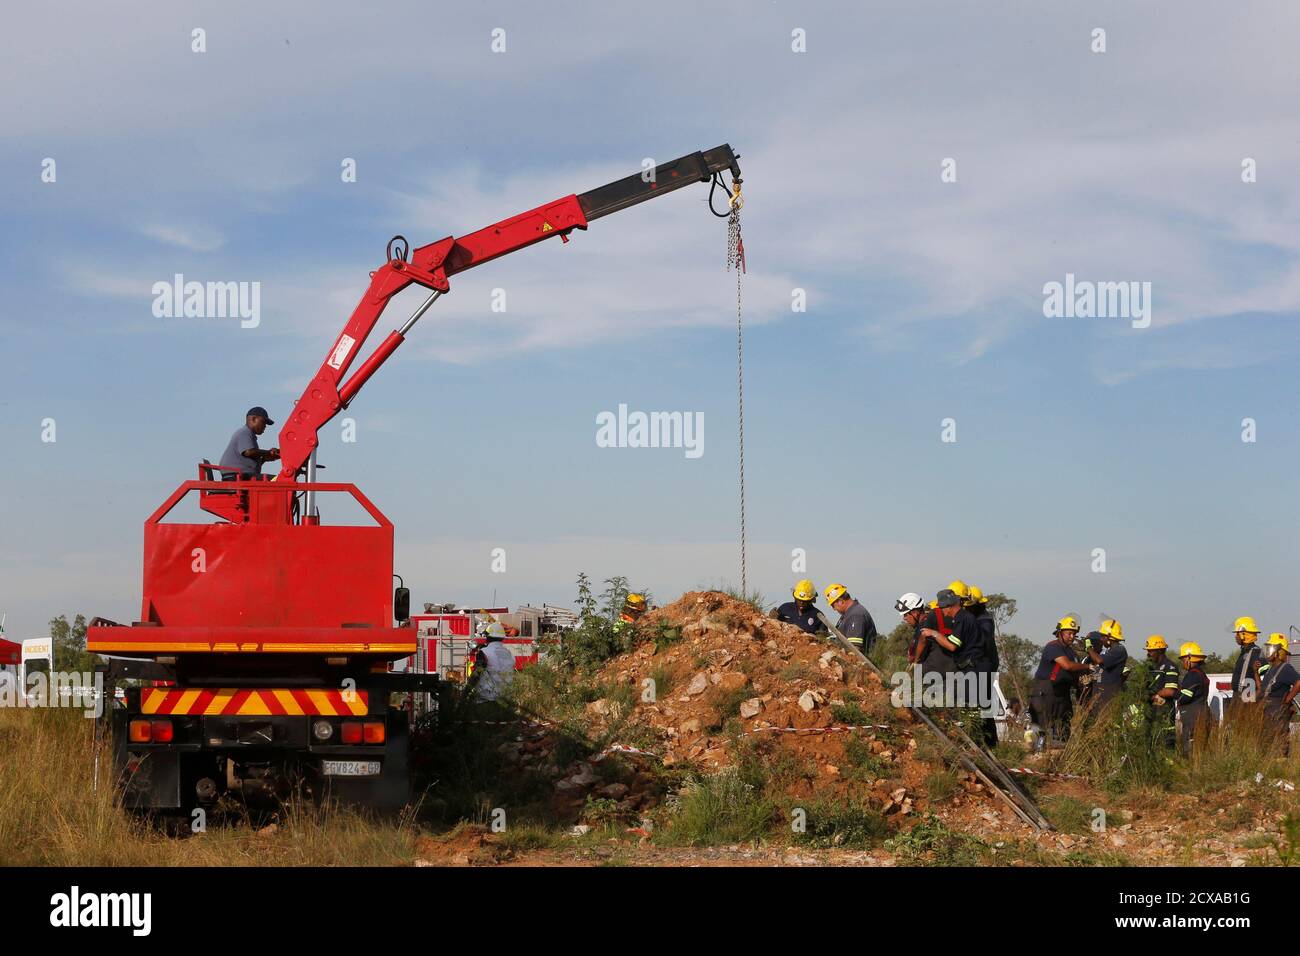 Rescue officials use a crane to remove debris as they work to rescue trapped suspected illegal miners from an abandoned gold shaft in Benoni, east of Johannesburg, February 16, 2014. South African rescuers started bringing to the surface at least 30 illegal miners on Sunday who had been trapped by debris in the abandoned gold shaft near Johannesburg, emergency services ER24 spokesman  Werner Vermaak said. There were no immediate reports of deaths or injuries. Vermaak later told Reuters that some of the miners still underground were refusing to come up, saying they did not want to be arrested.  Stock Photo